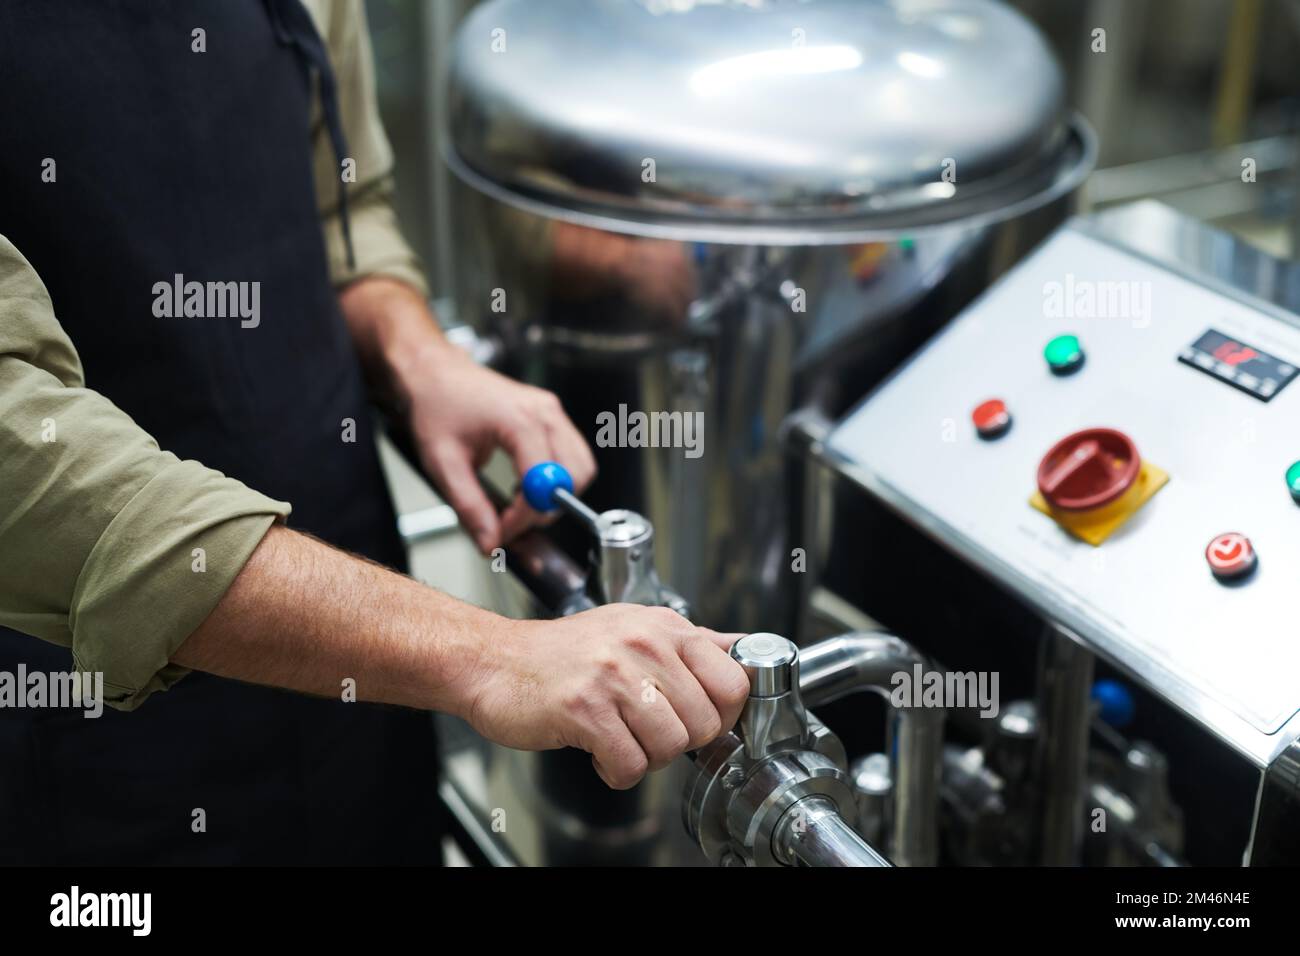 Hands of worker operating brewery equipment to set needed pressure Stock Photo